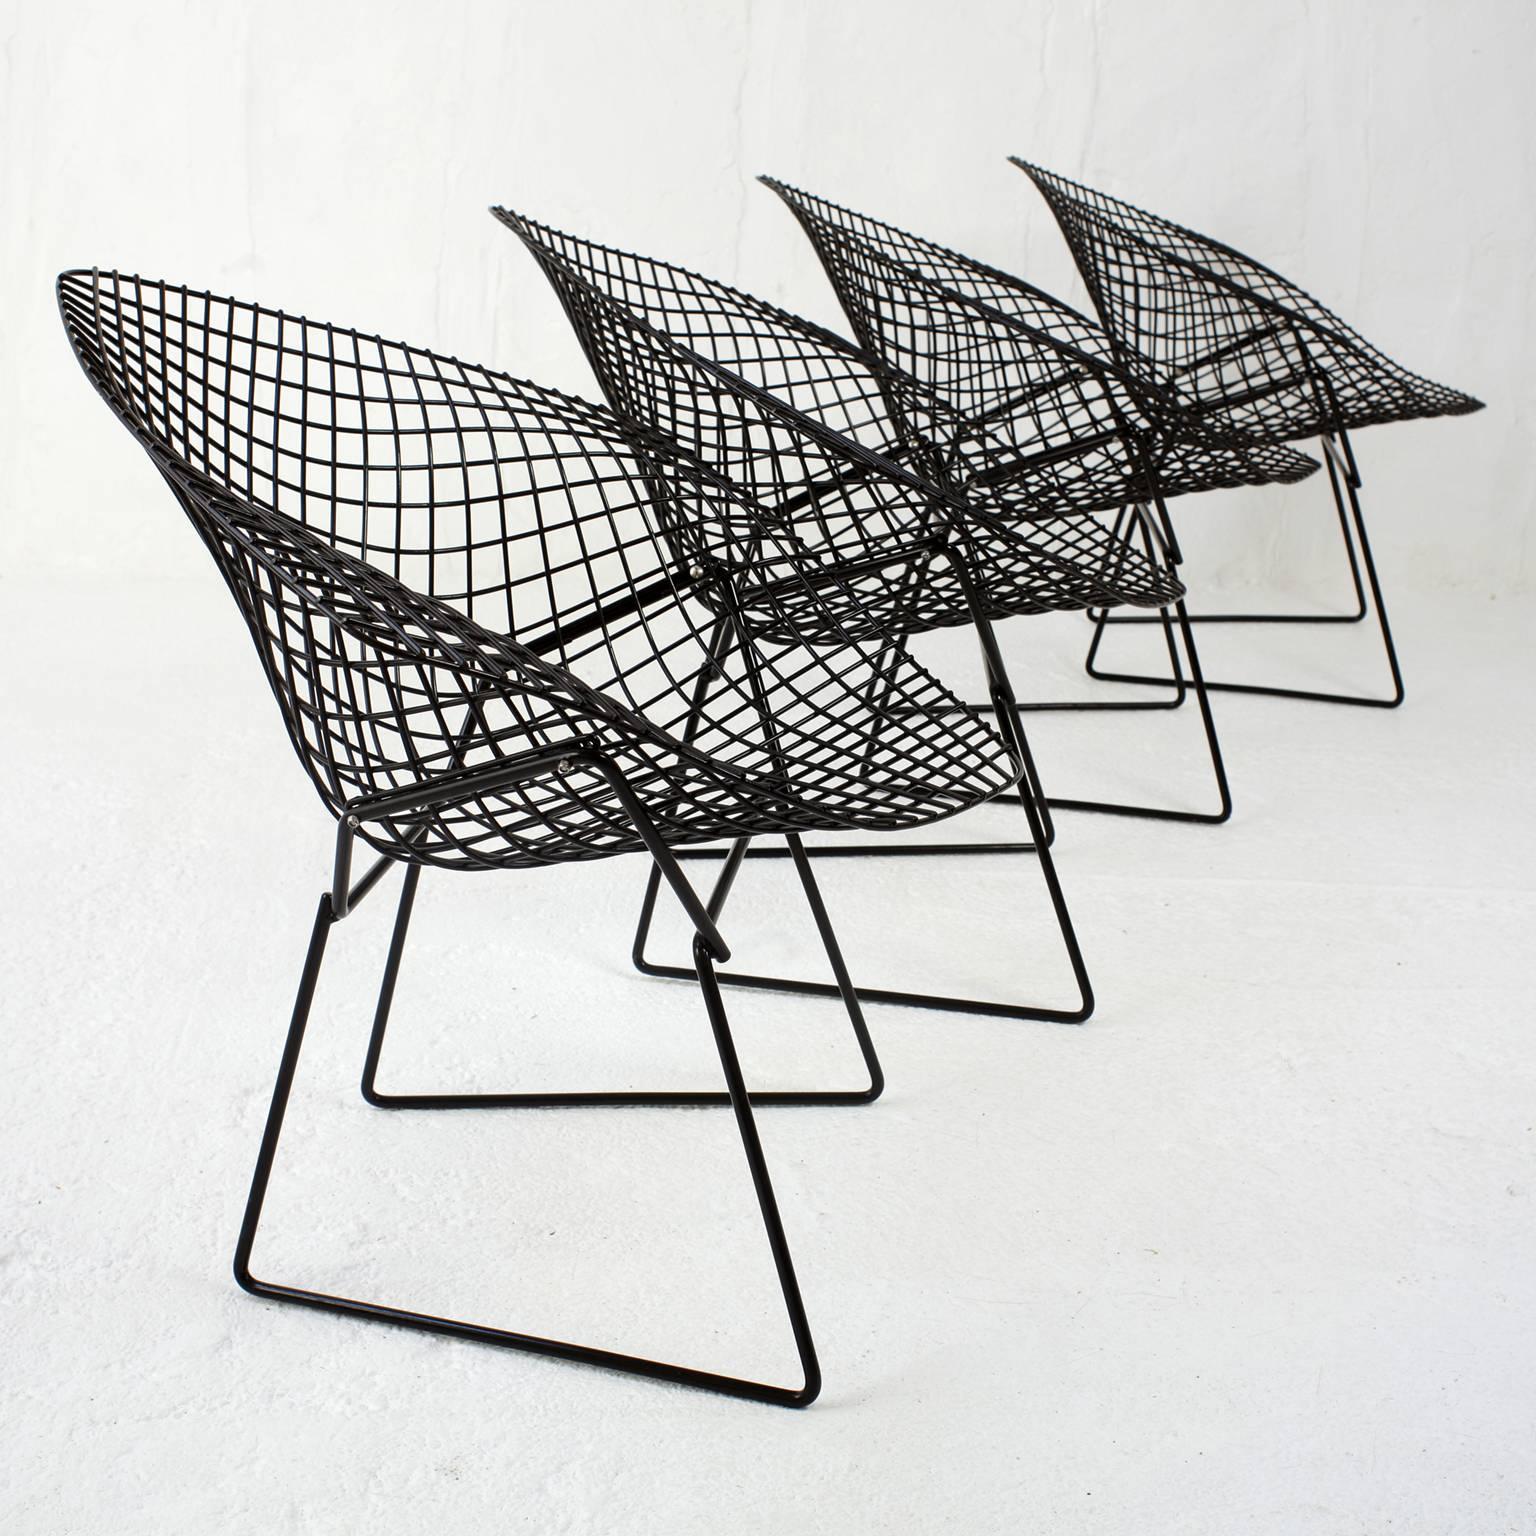 Set of four Harry Bertoia black diamond chairs for Knoll, created in 1953.
This model came from the 1990s.
In very good original condition.